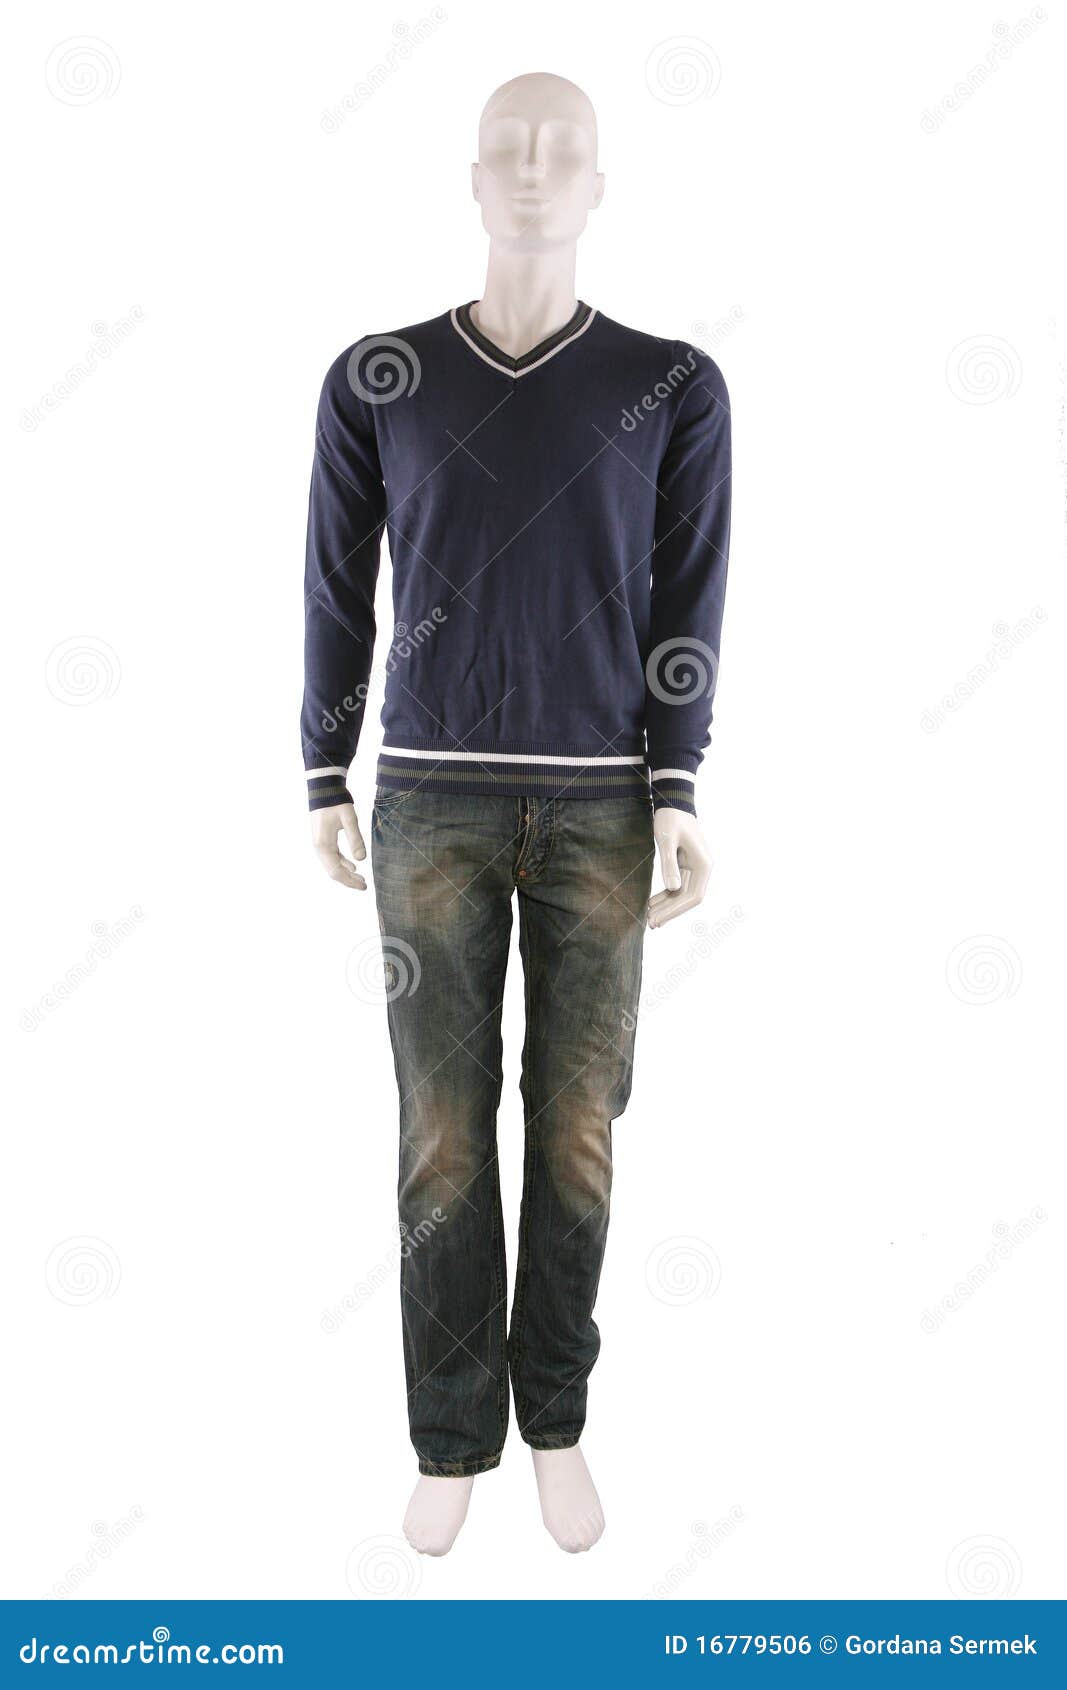 Male Mannequin Dressed in Sweater and Jeans Stock Photo - Image of ...